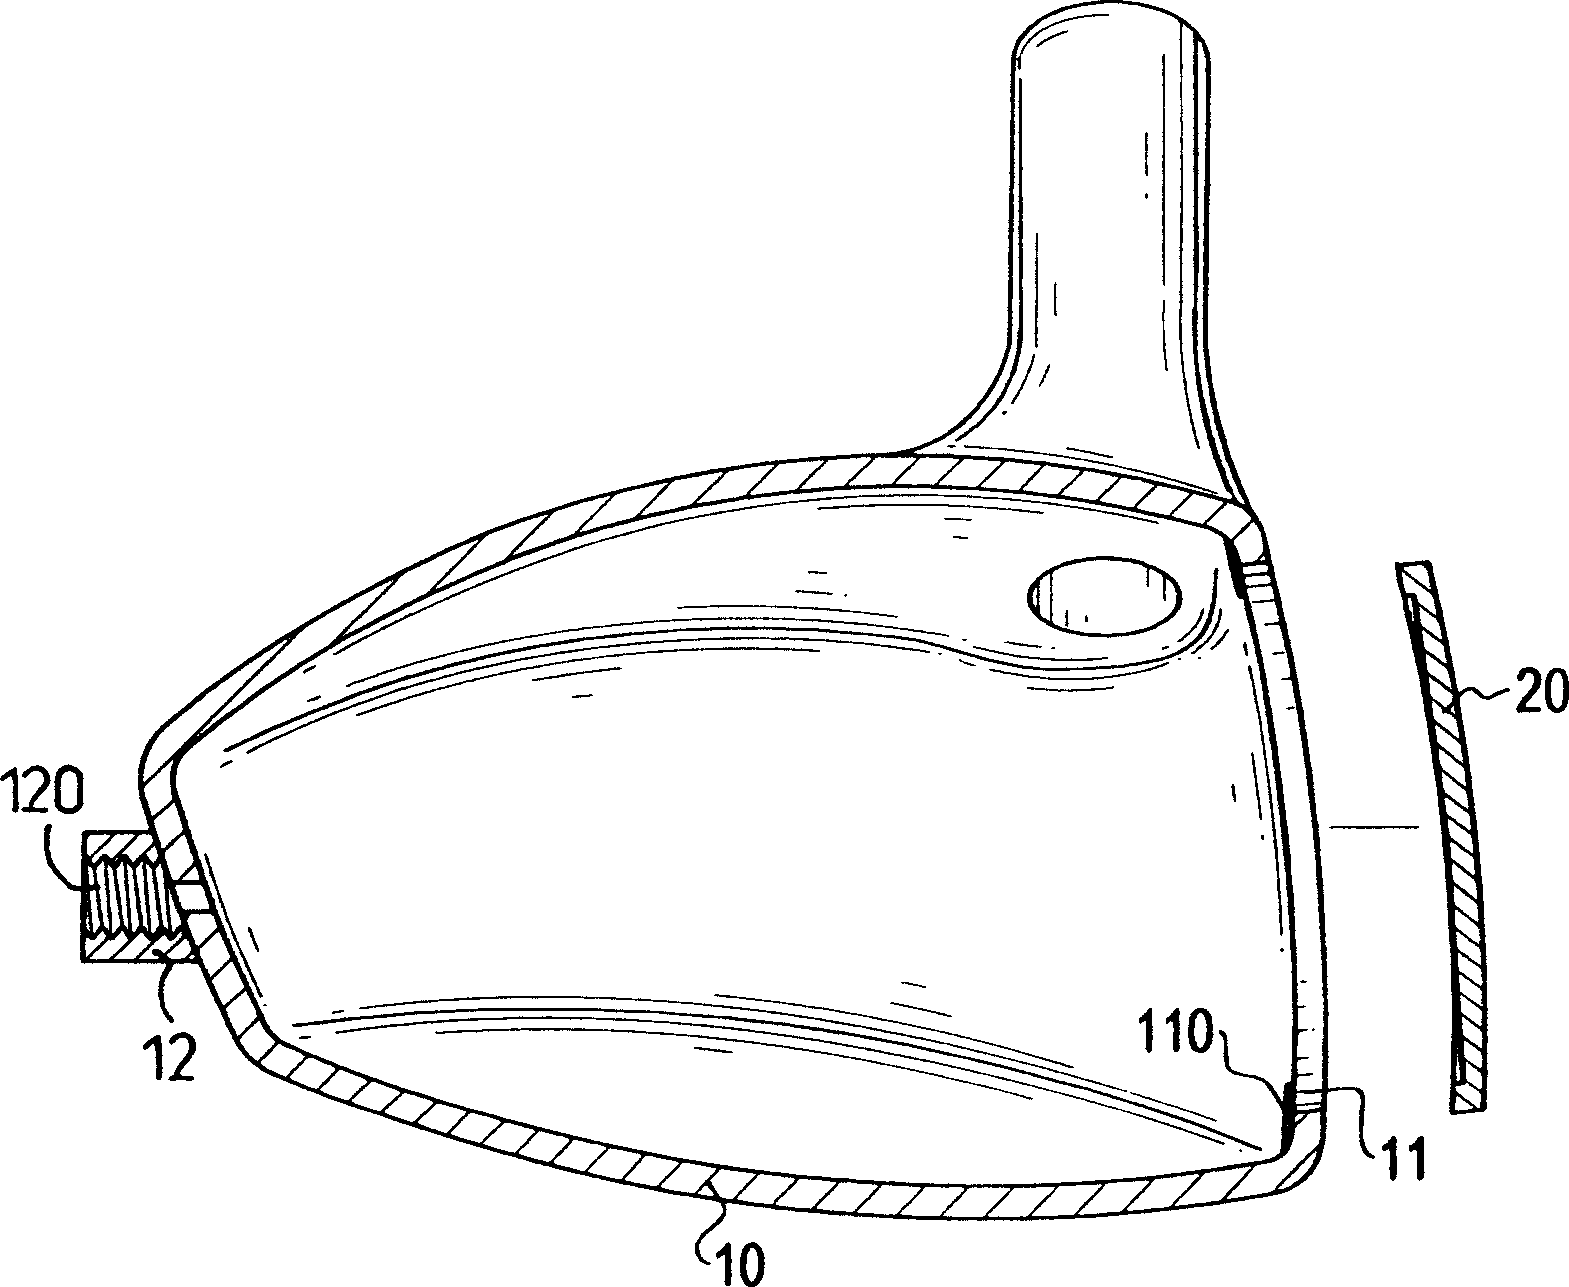 Golf head and connecting method of its surface plate